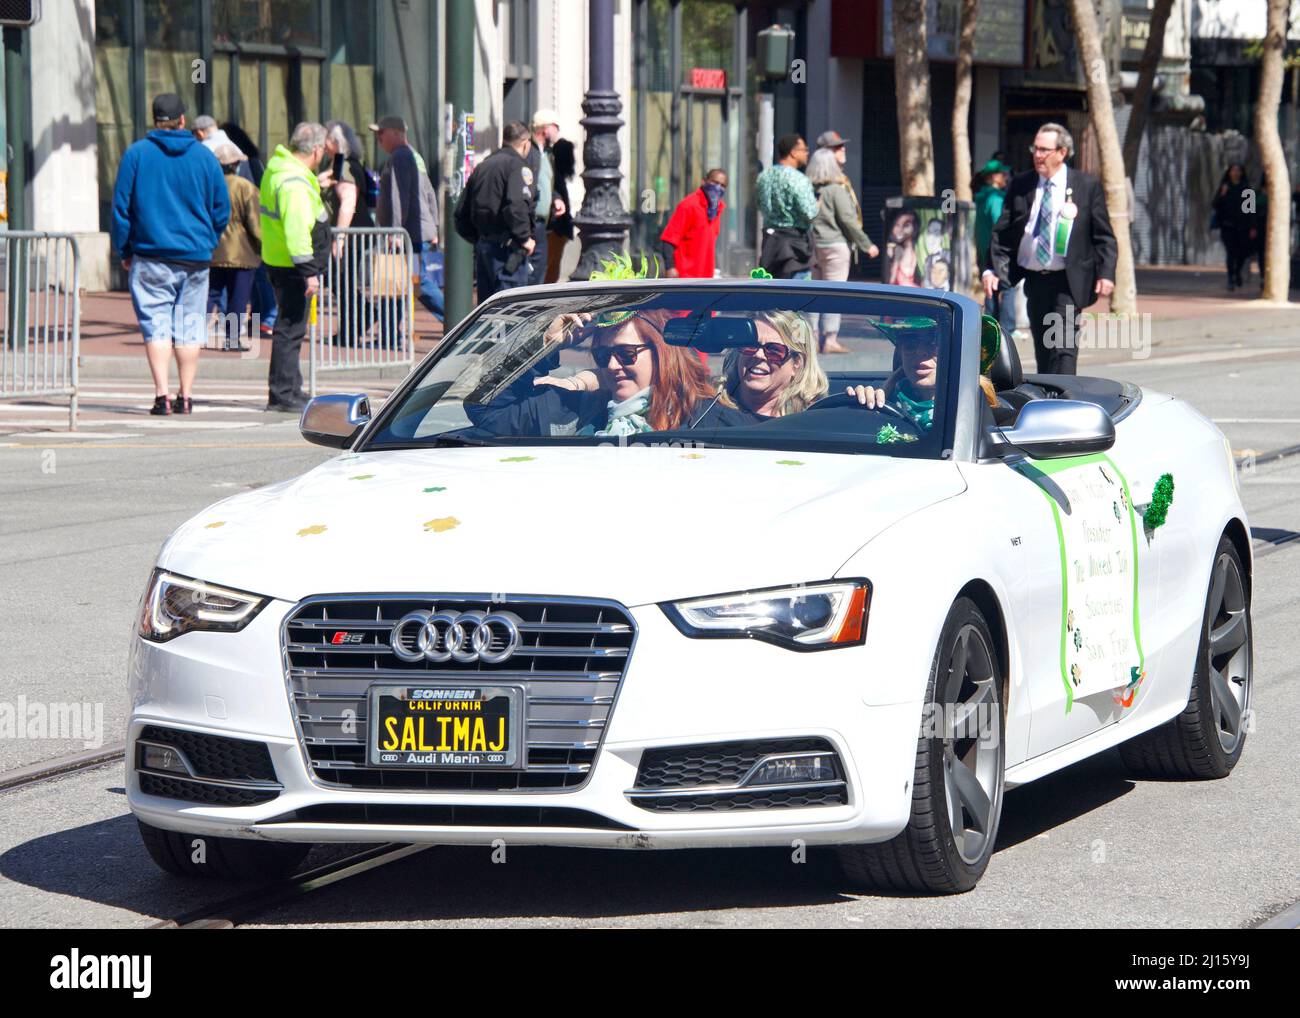 San Francisco, CA - March 12, 2022: Unidentified participants in the 2022 Saint Patrick's Day Parade, the West Coast's largest Irish event celebrating Stock Photo